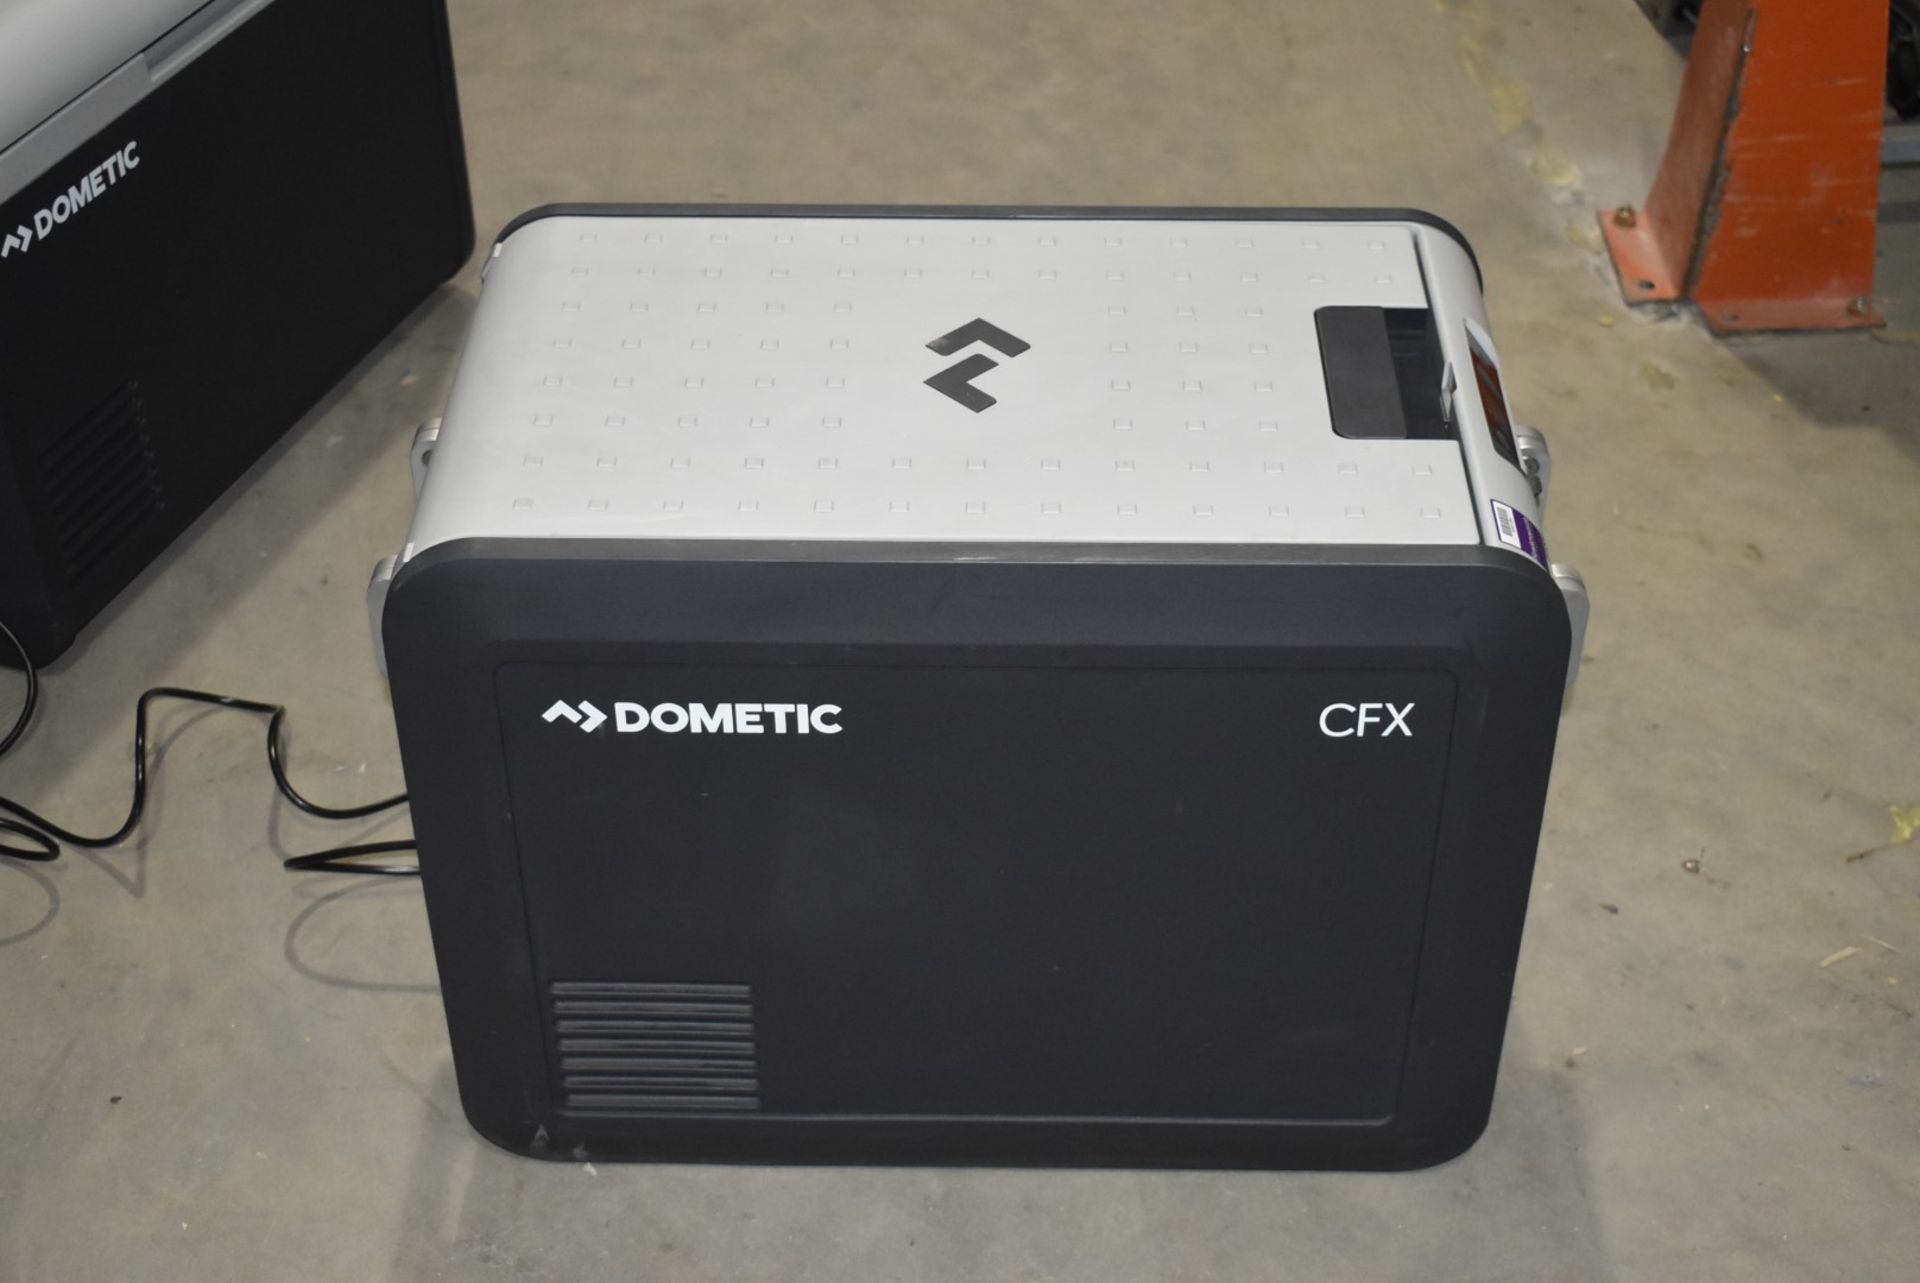 1 x Dometic CFX3 45 Portable 40l Compressor Cooler and Freezer - Features Bluetooth and WiFi - Image 3 of 10